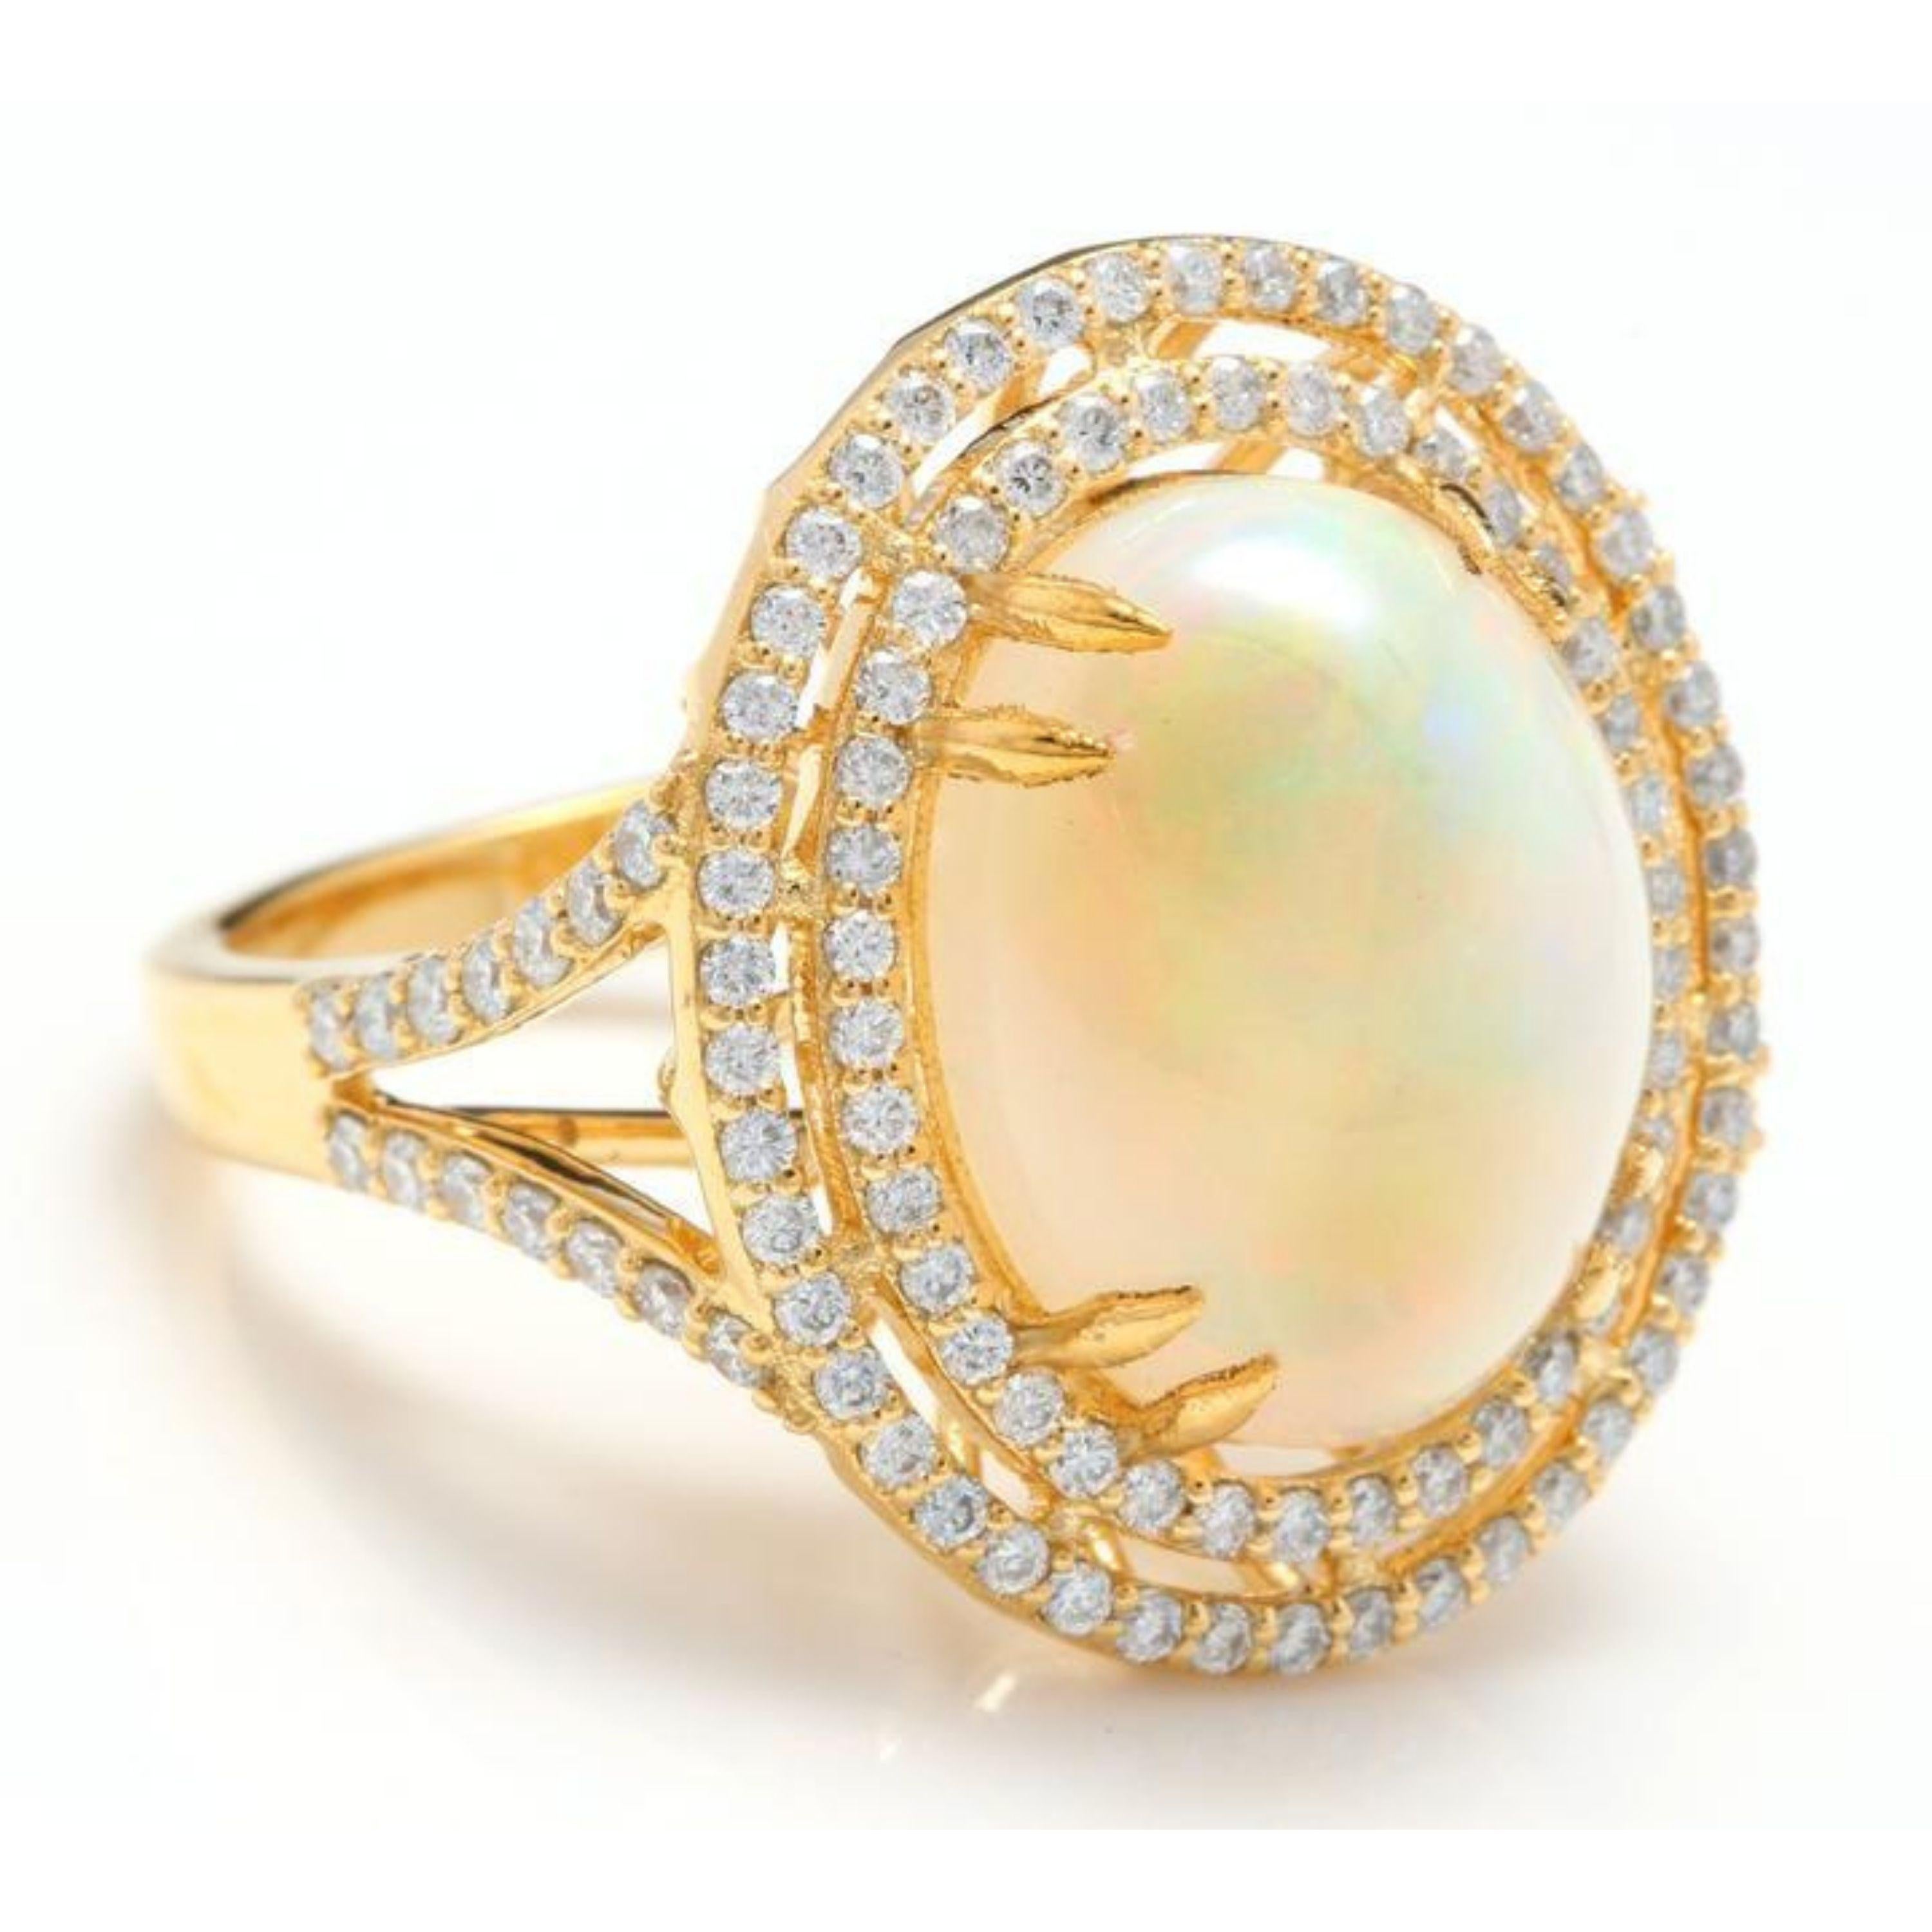 6.30 Carats Natural Impressive Ethiopian Opal and Diamond 14K Solid Yellow Gold Ring

The opal has beautiful fire, pictures don't show the whole beauty of the opal!

Suggested Replacement Value: Approx. $7,200.00

Total Natural Opal Weight is: